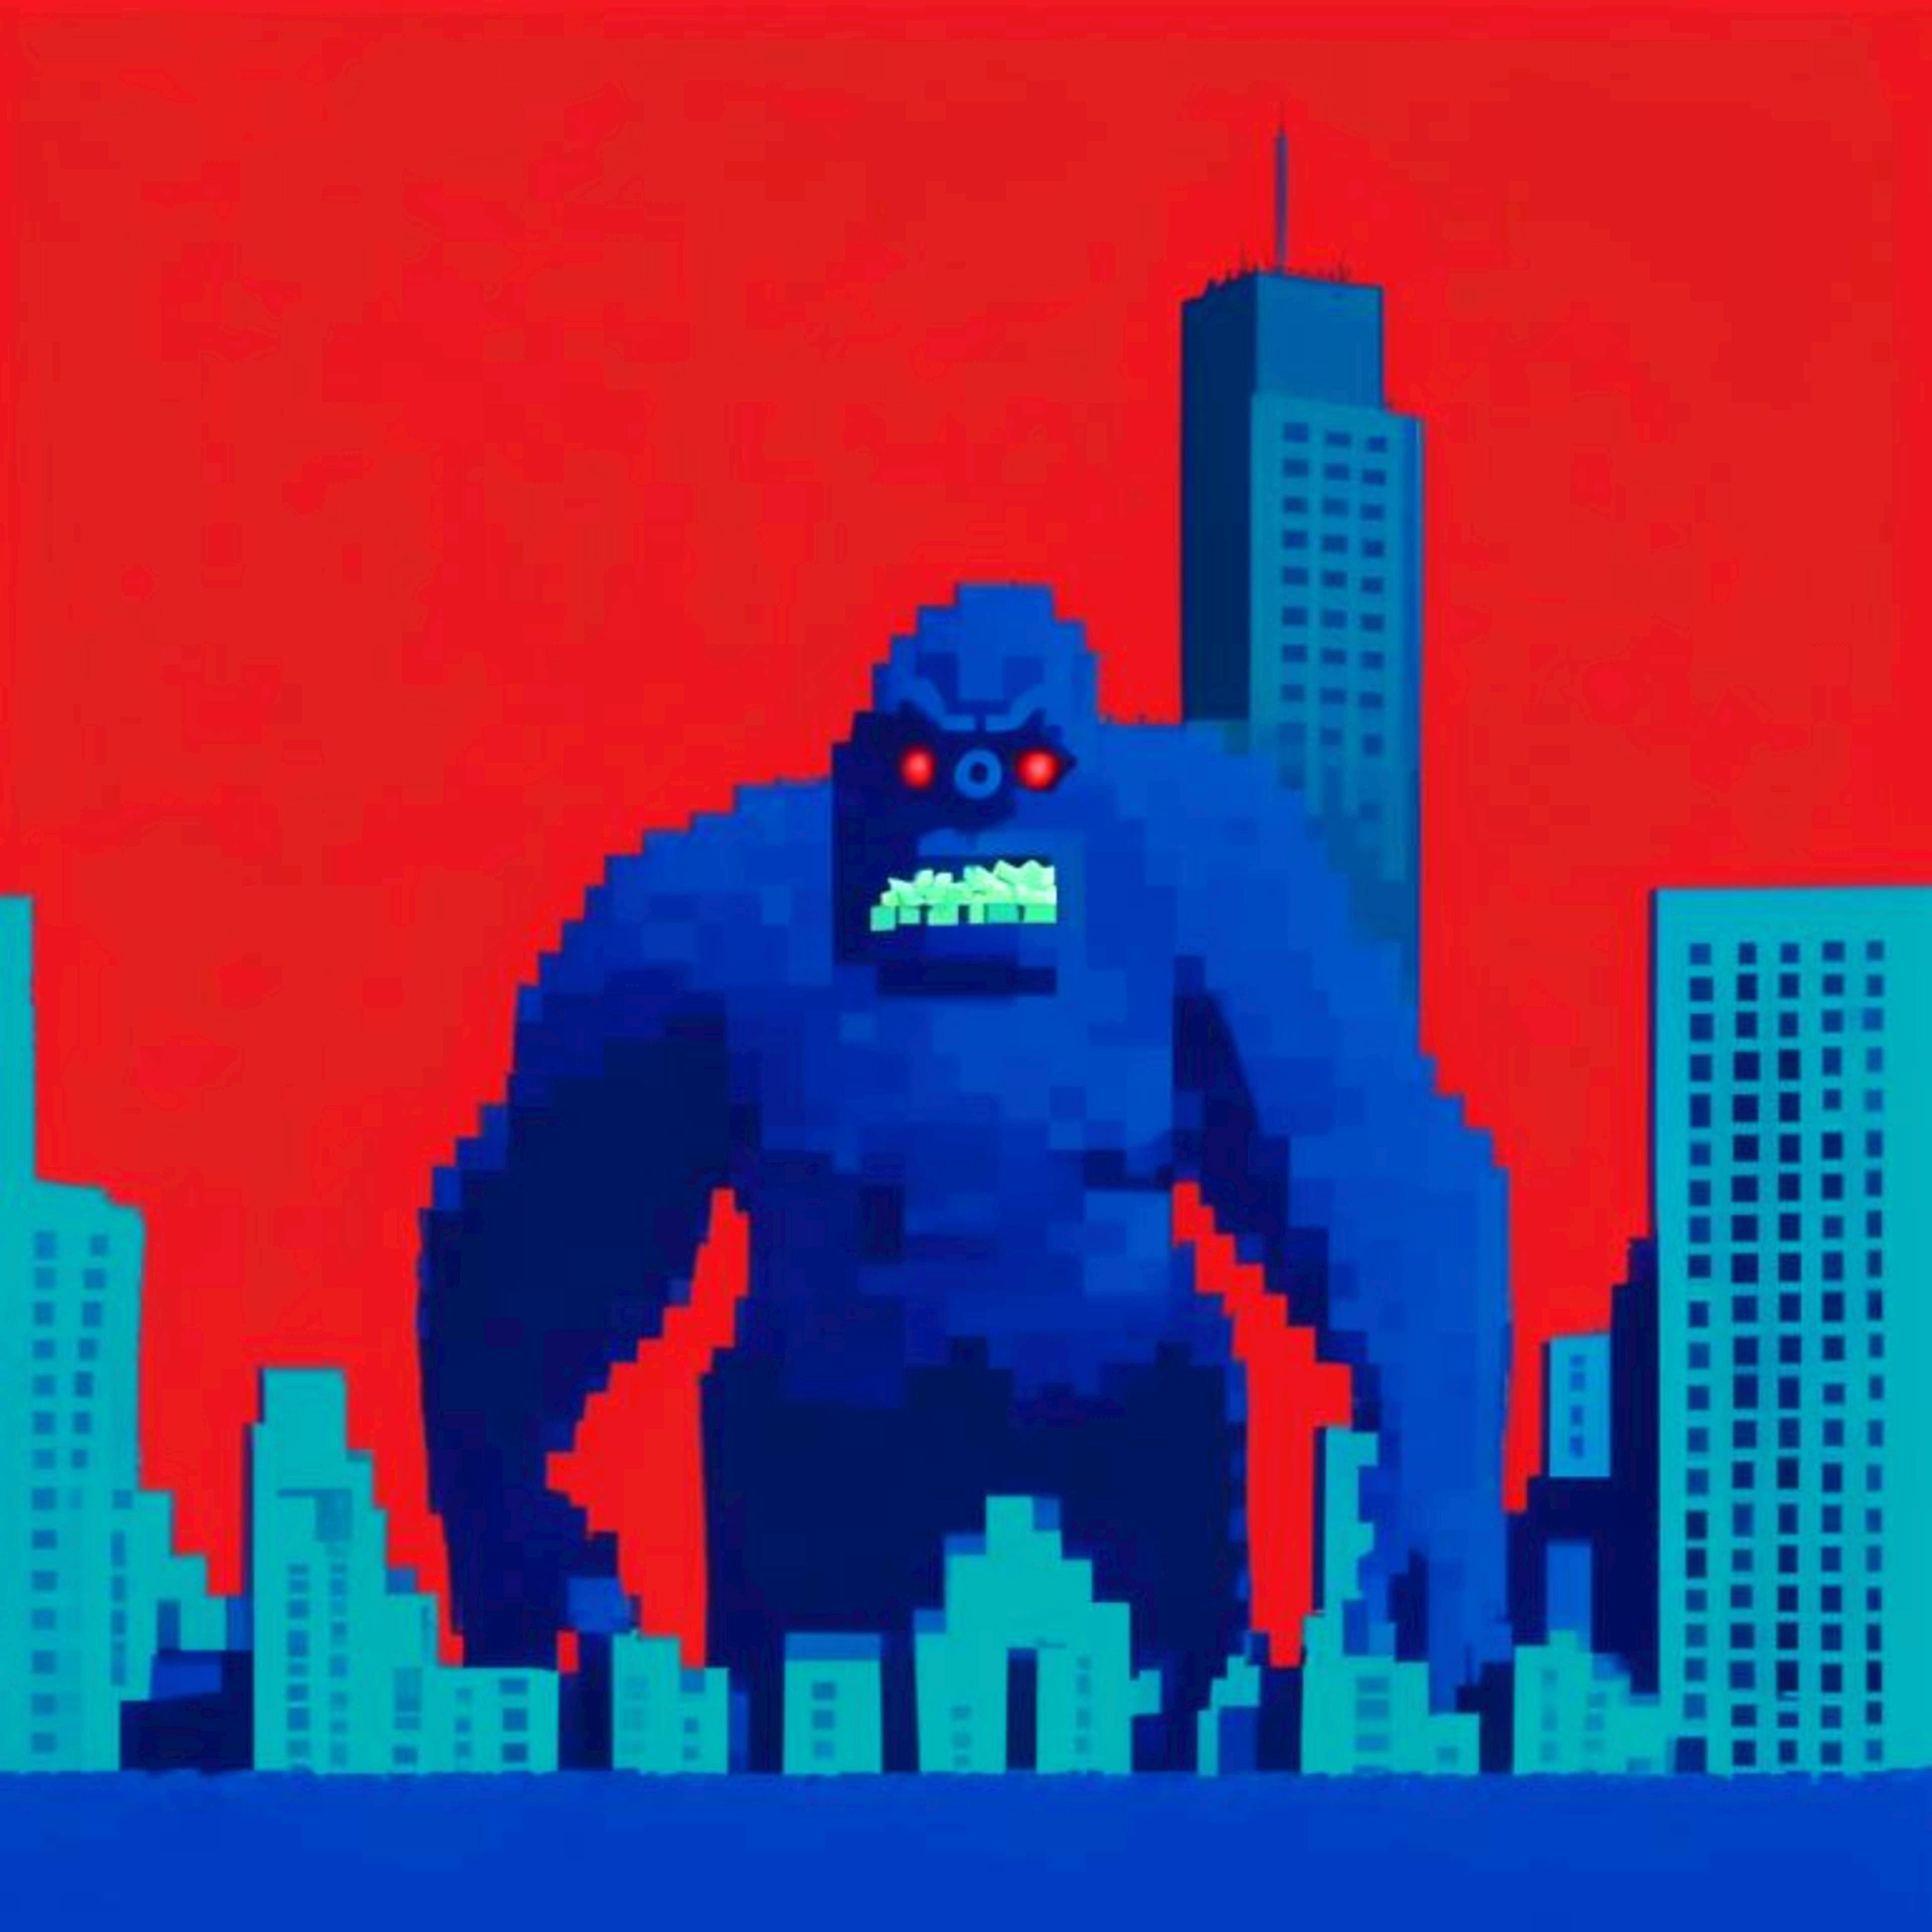 BLUE MONSTER WITH RED EYES IN NEW YORK